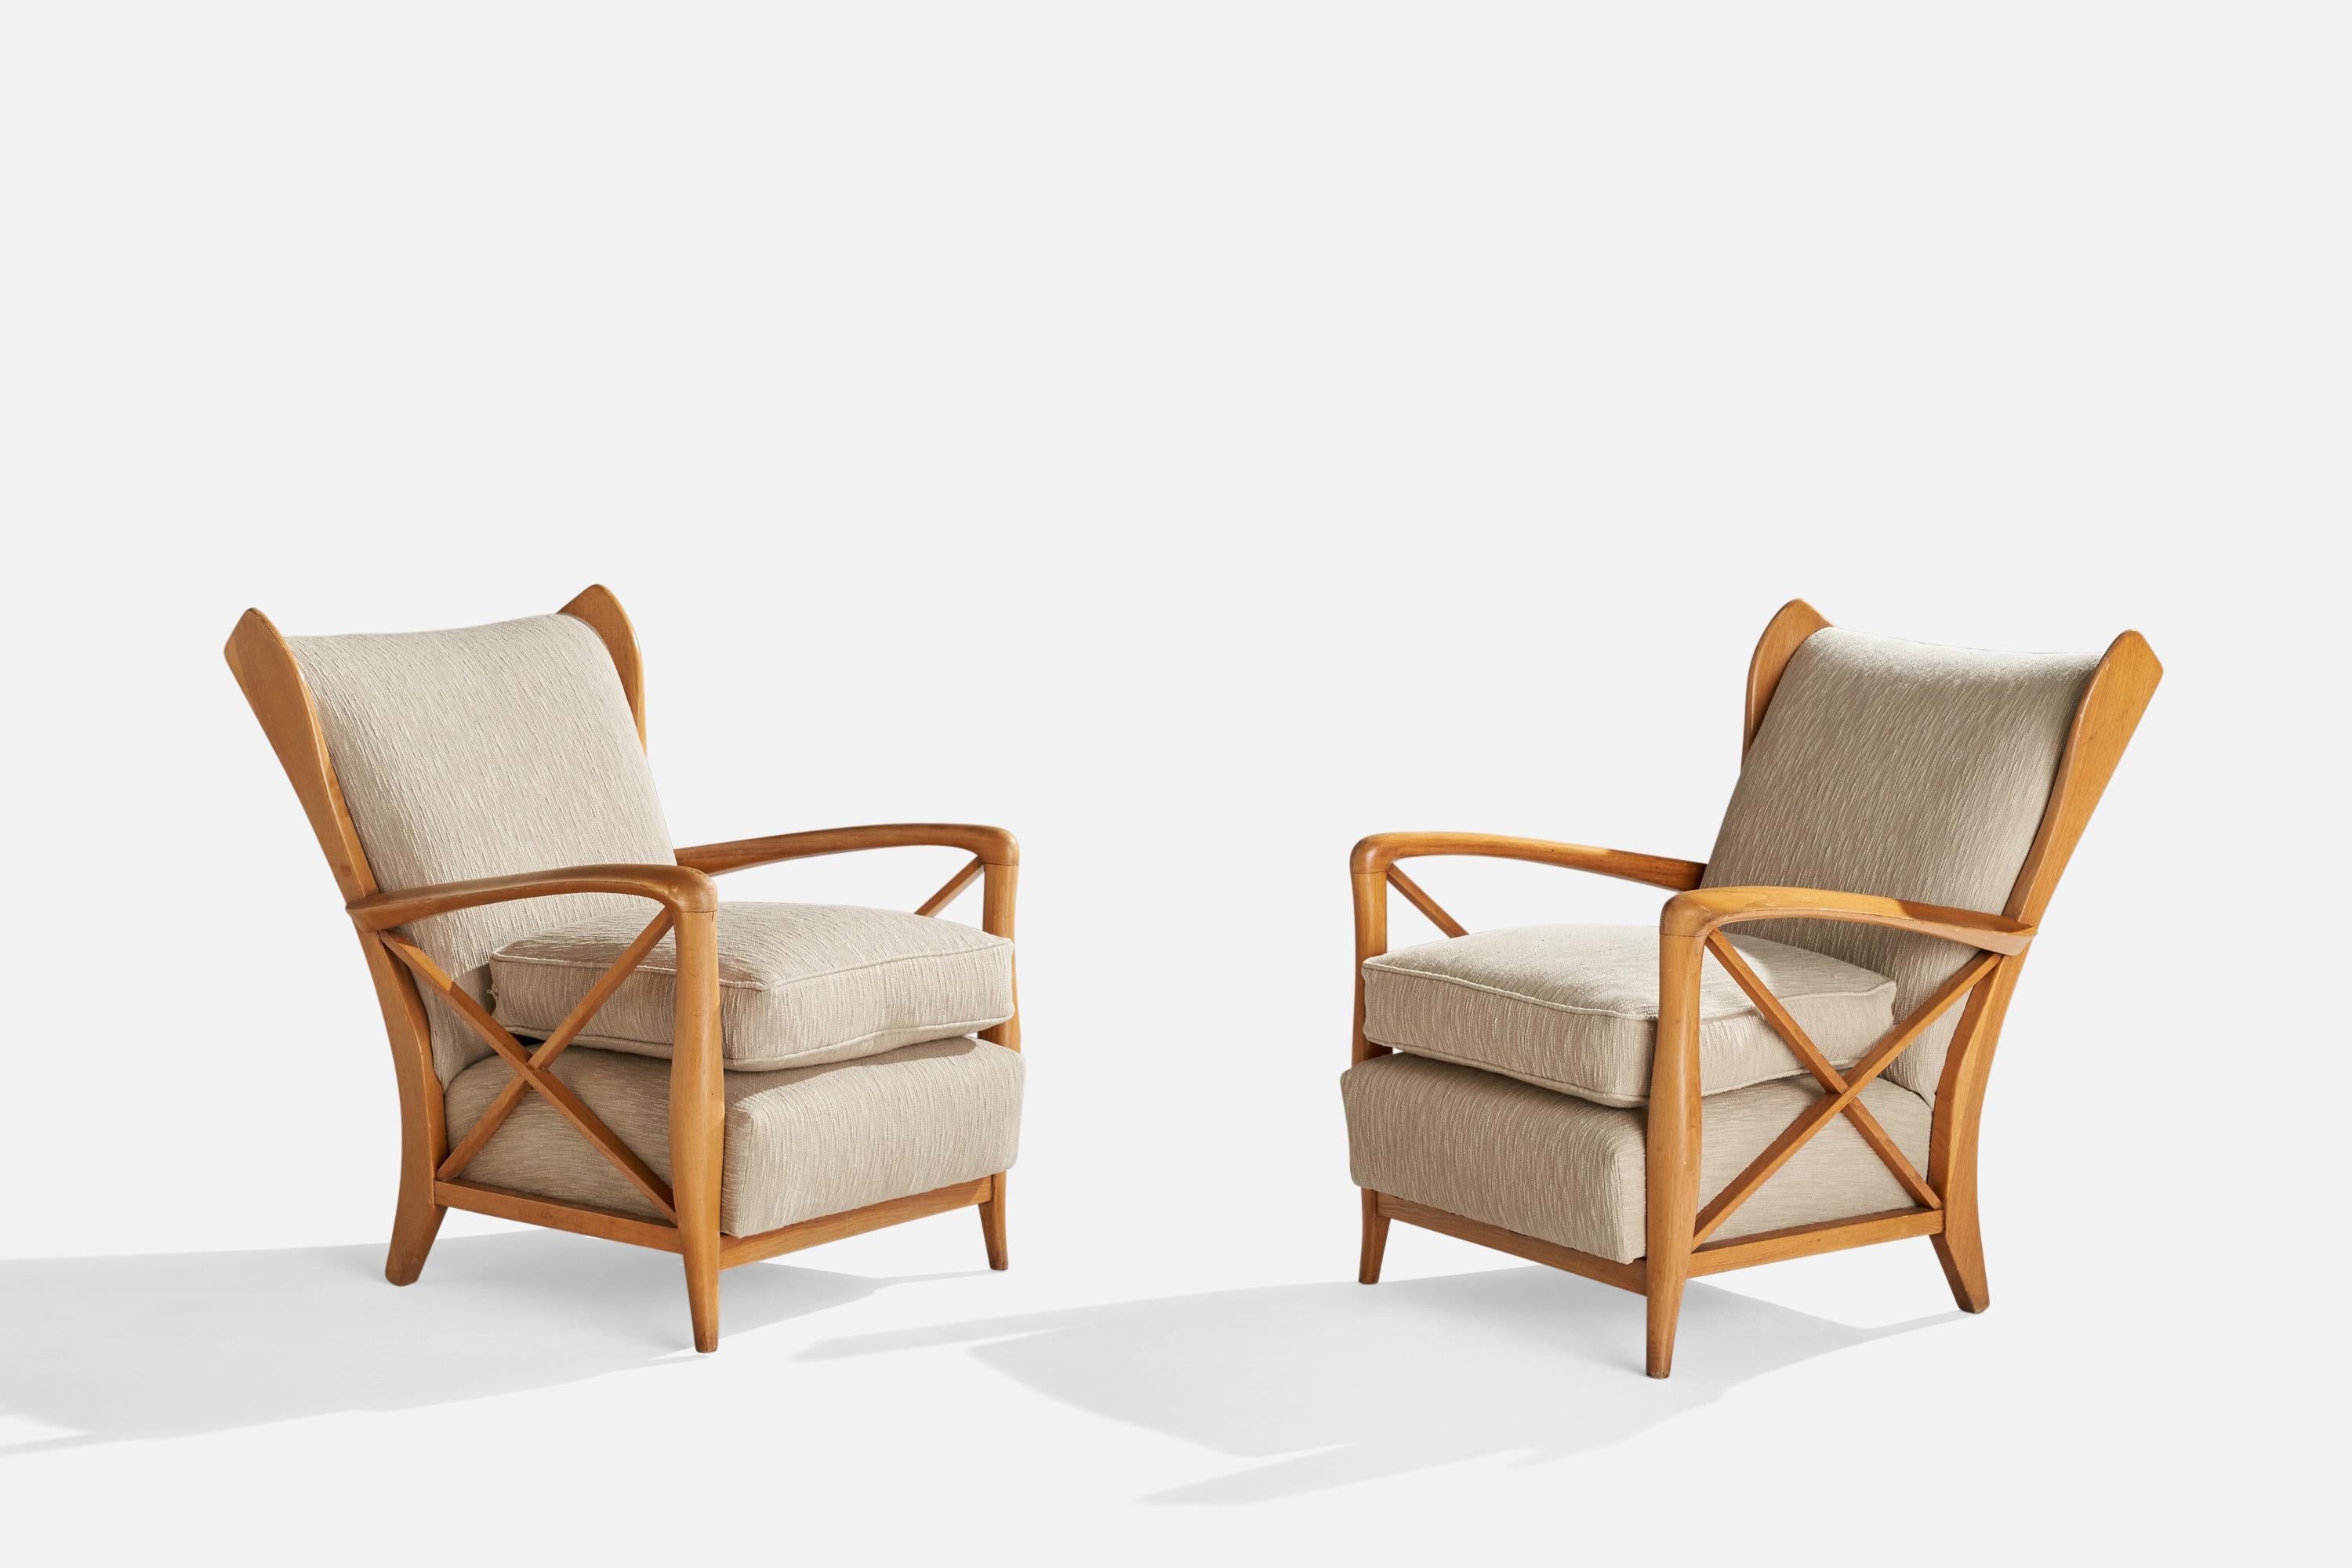 A pair of sizeable oak and beige fabric lounge chairs designed and produced in Italy, 1940s.

Seat height 18.5”.